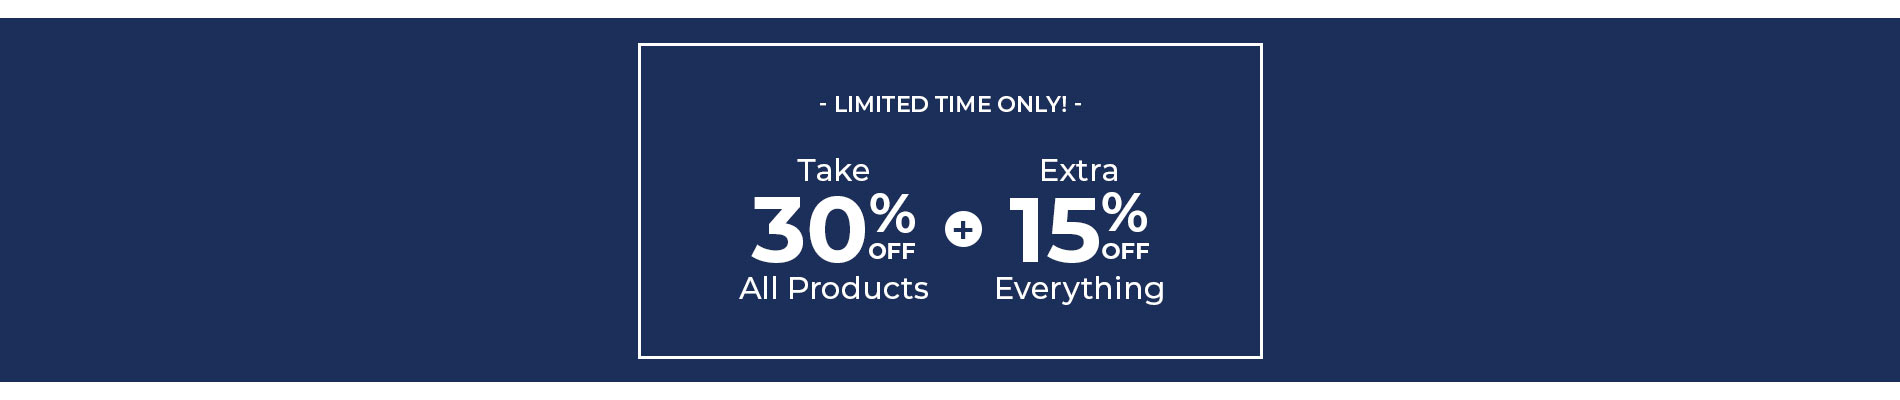 Take 30% + Extra 15% Off